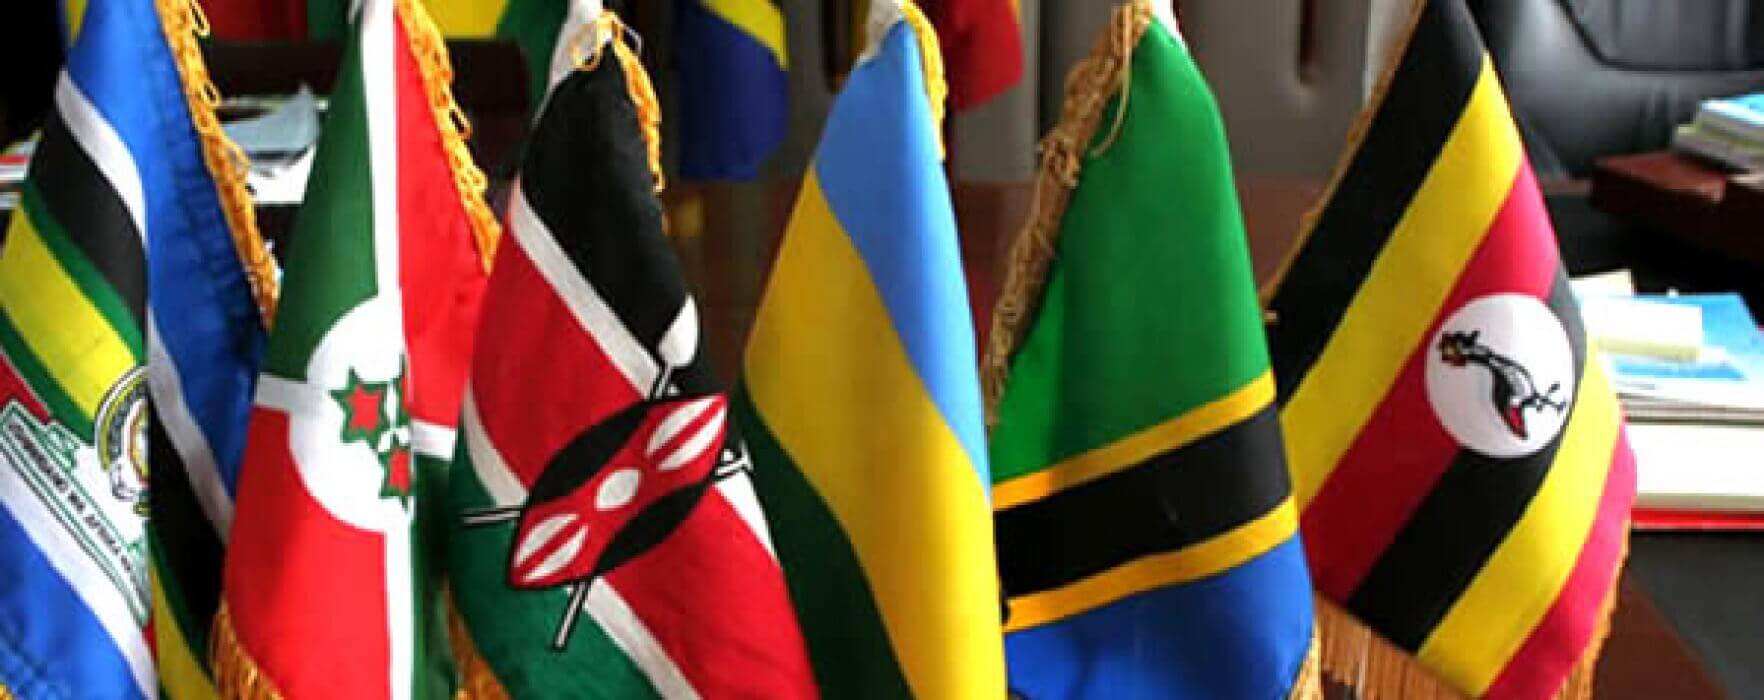 UK Offers FTA Signed With Kenya to All EAC Member States to Protect Regional Integration